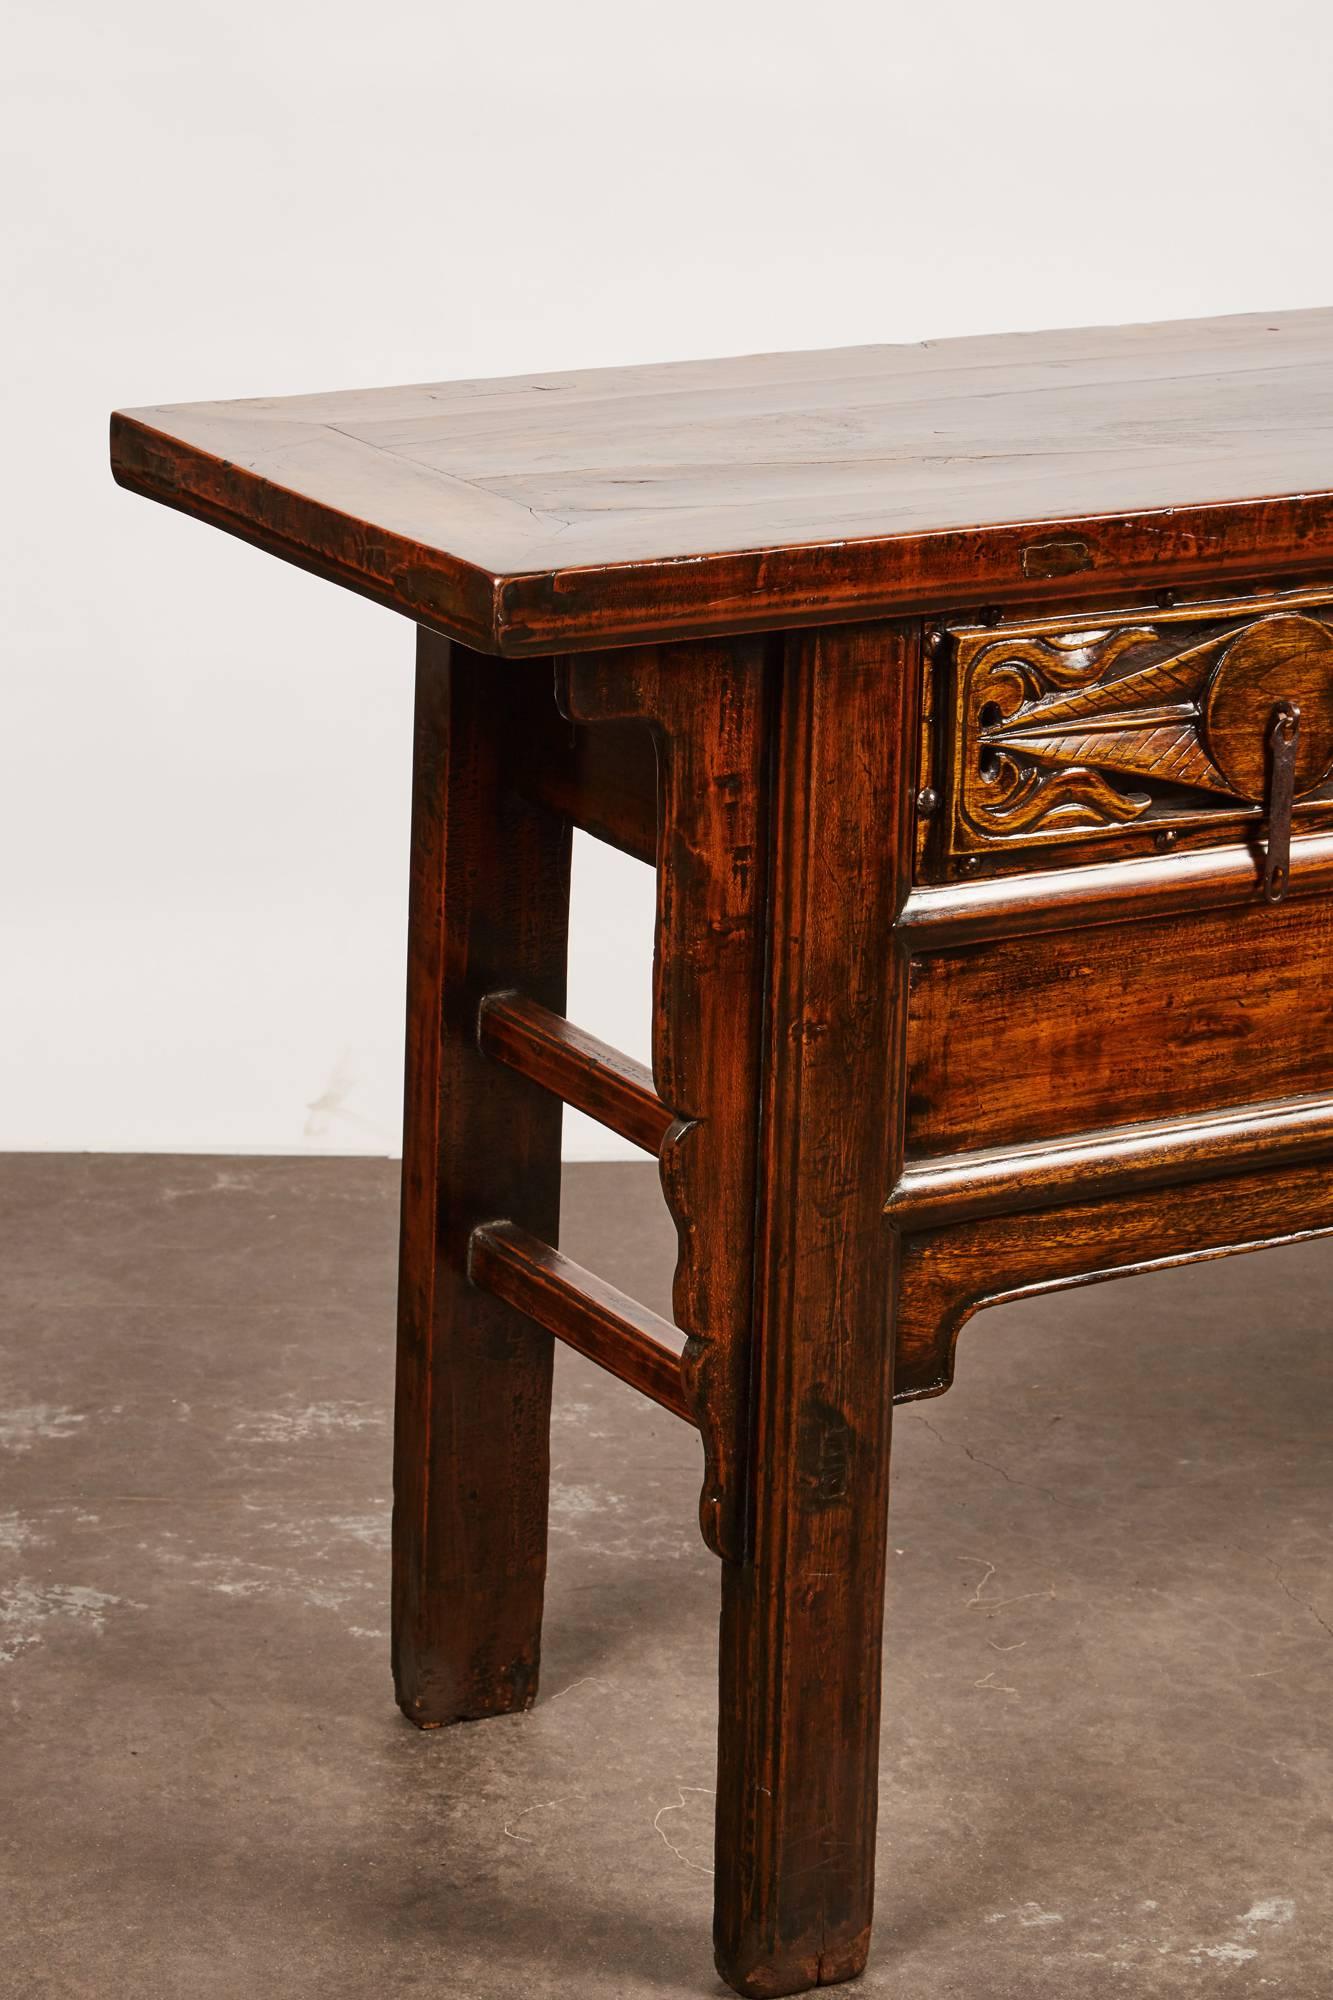 A late 18th century Mongolian elm console table that features three distinctively carved drawers. The set of three drawers are carved to portray identical abstract foliage designs with exposed nailheads along the trim.